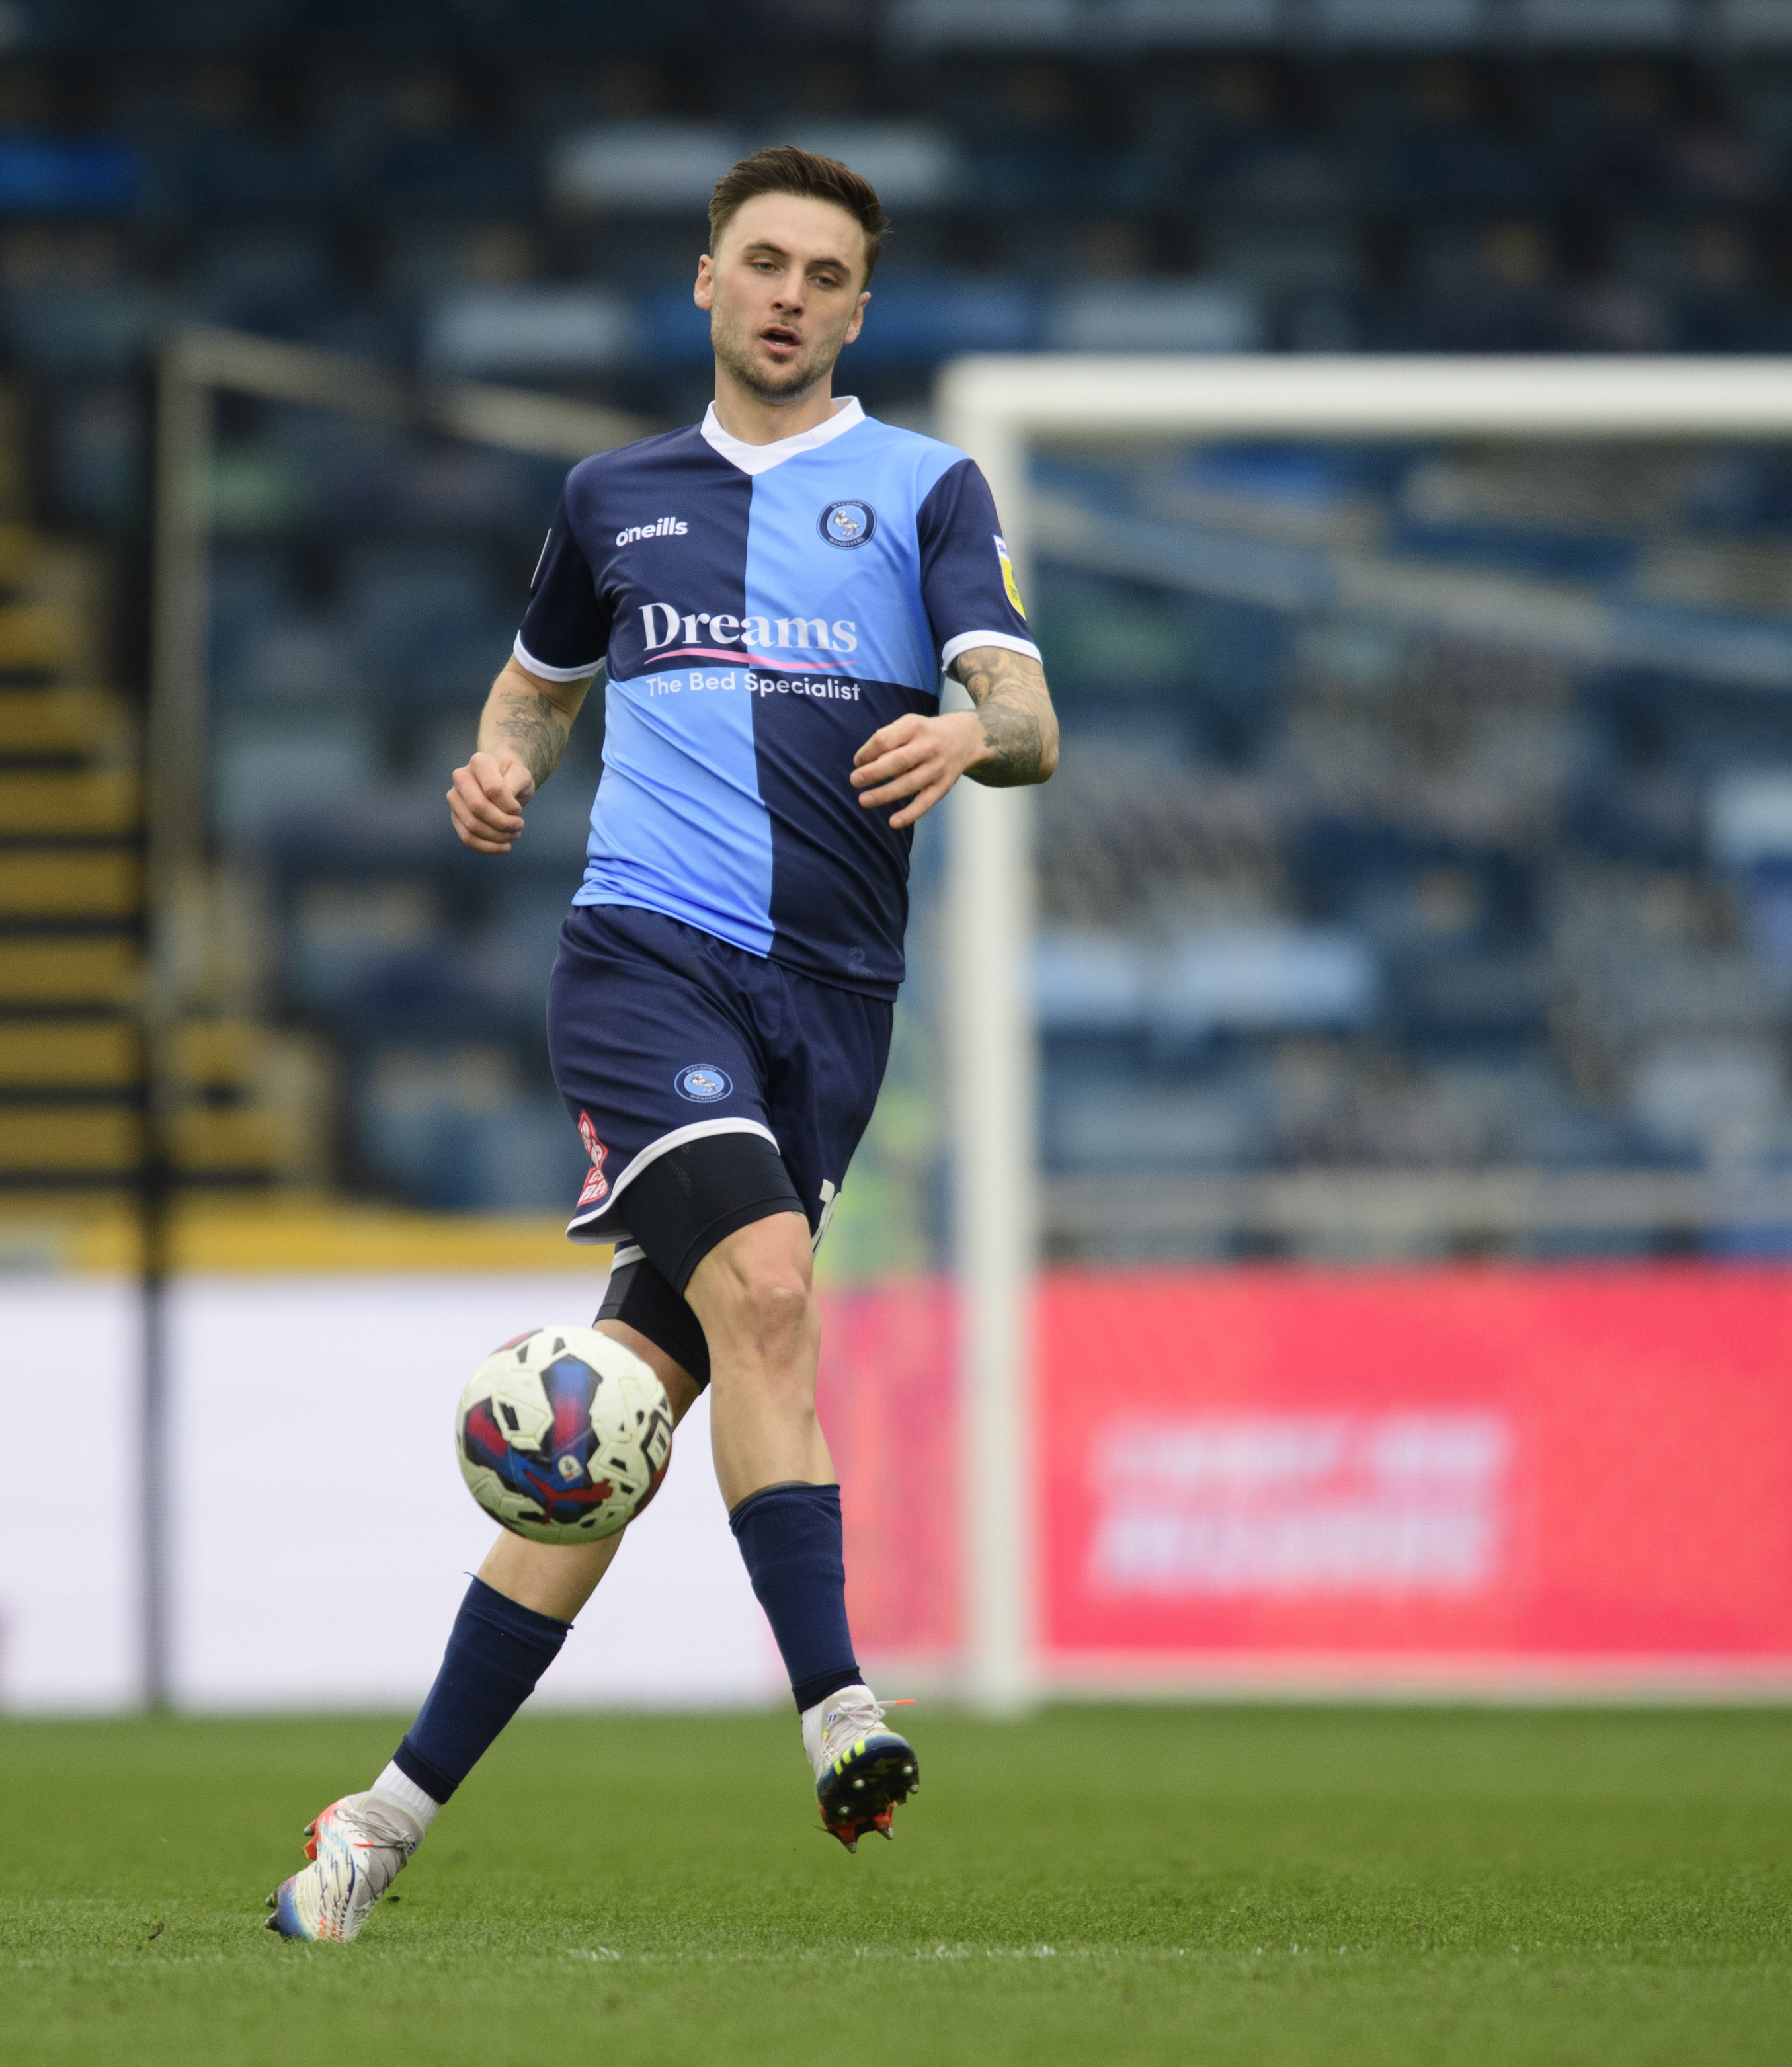 Wycombe Wanderers v Lincoln City - Sky Bet League One